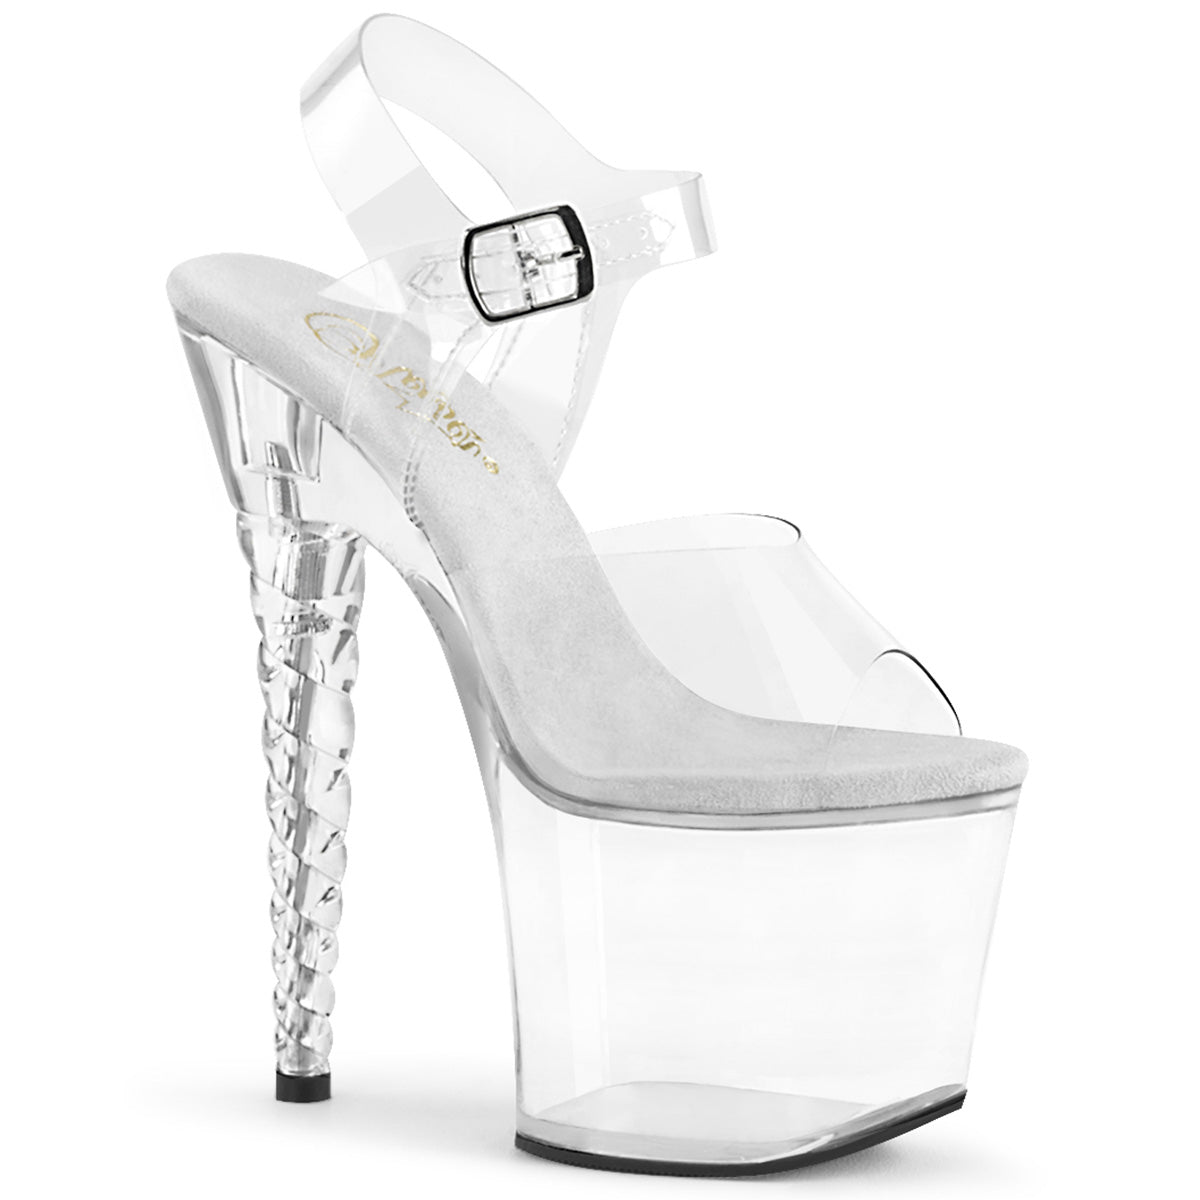 UNICORN-708 Pleaser 7 Inch Heel Clear Pole Dancing Platforms-Pleaser- Sexy Shoes